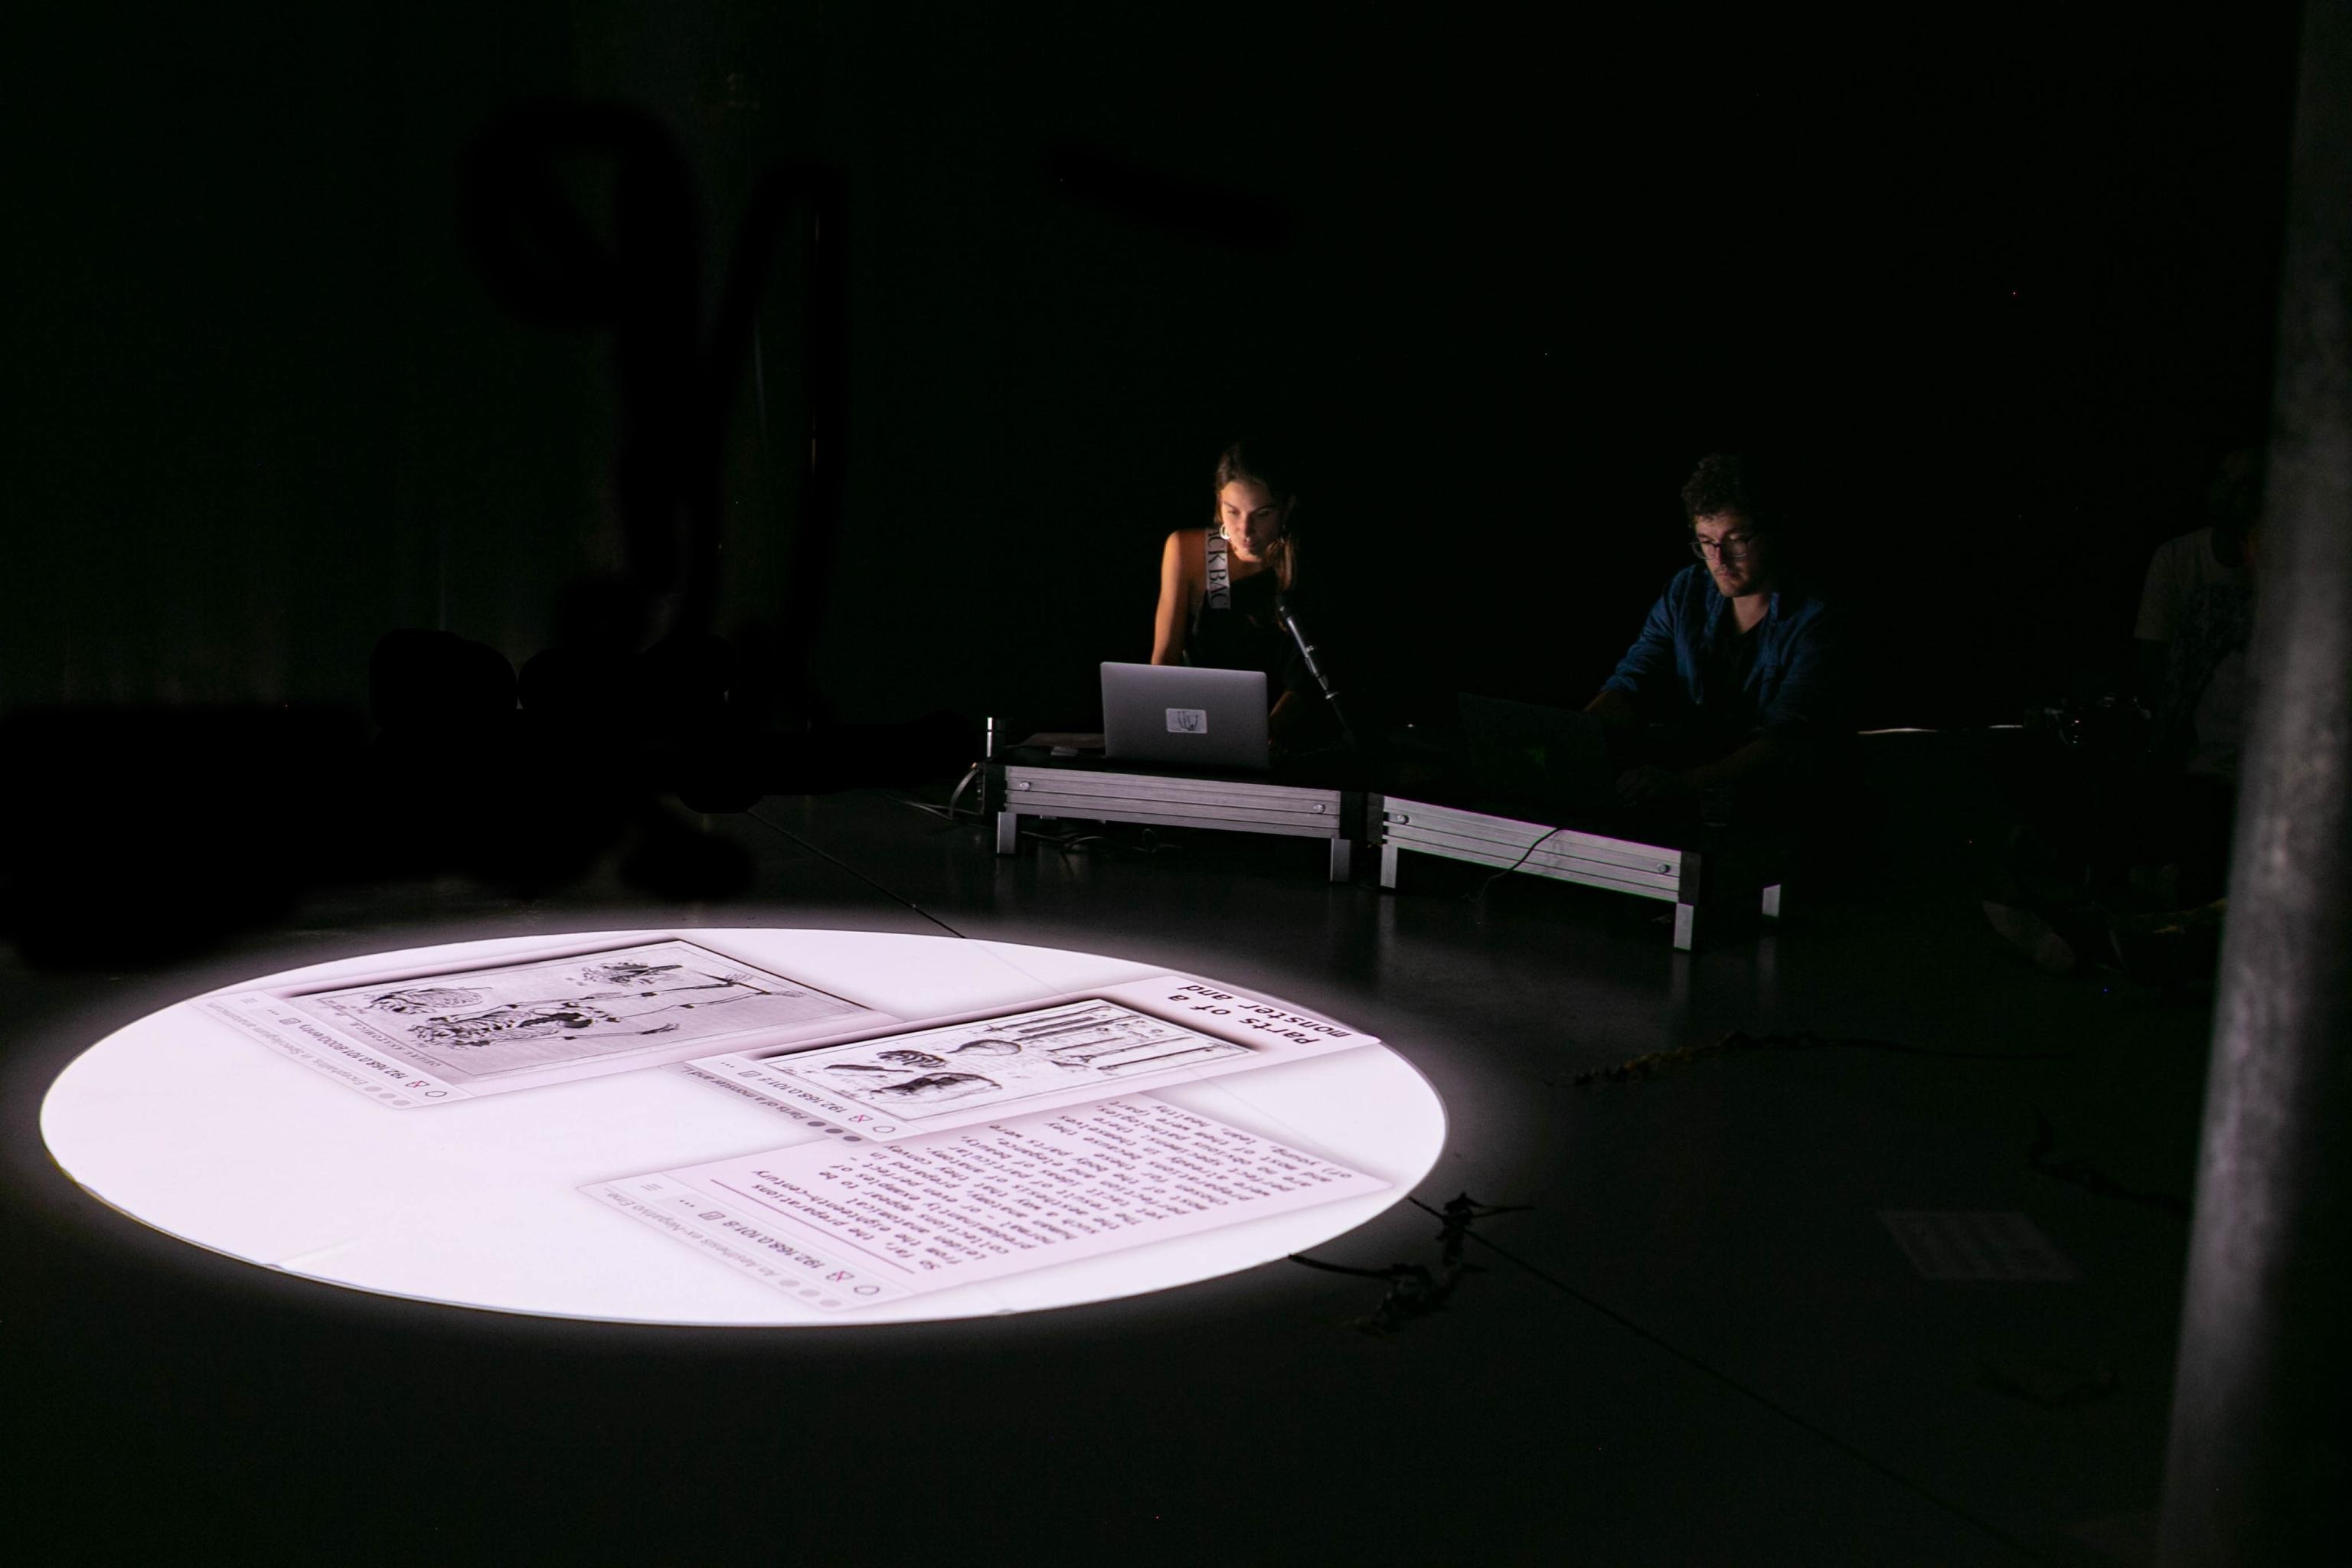 image of the two performers in their computers and performance set up with a circular projection of the floor